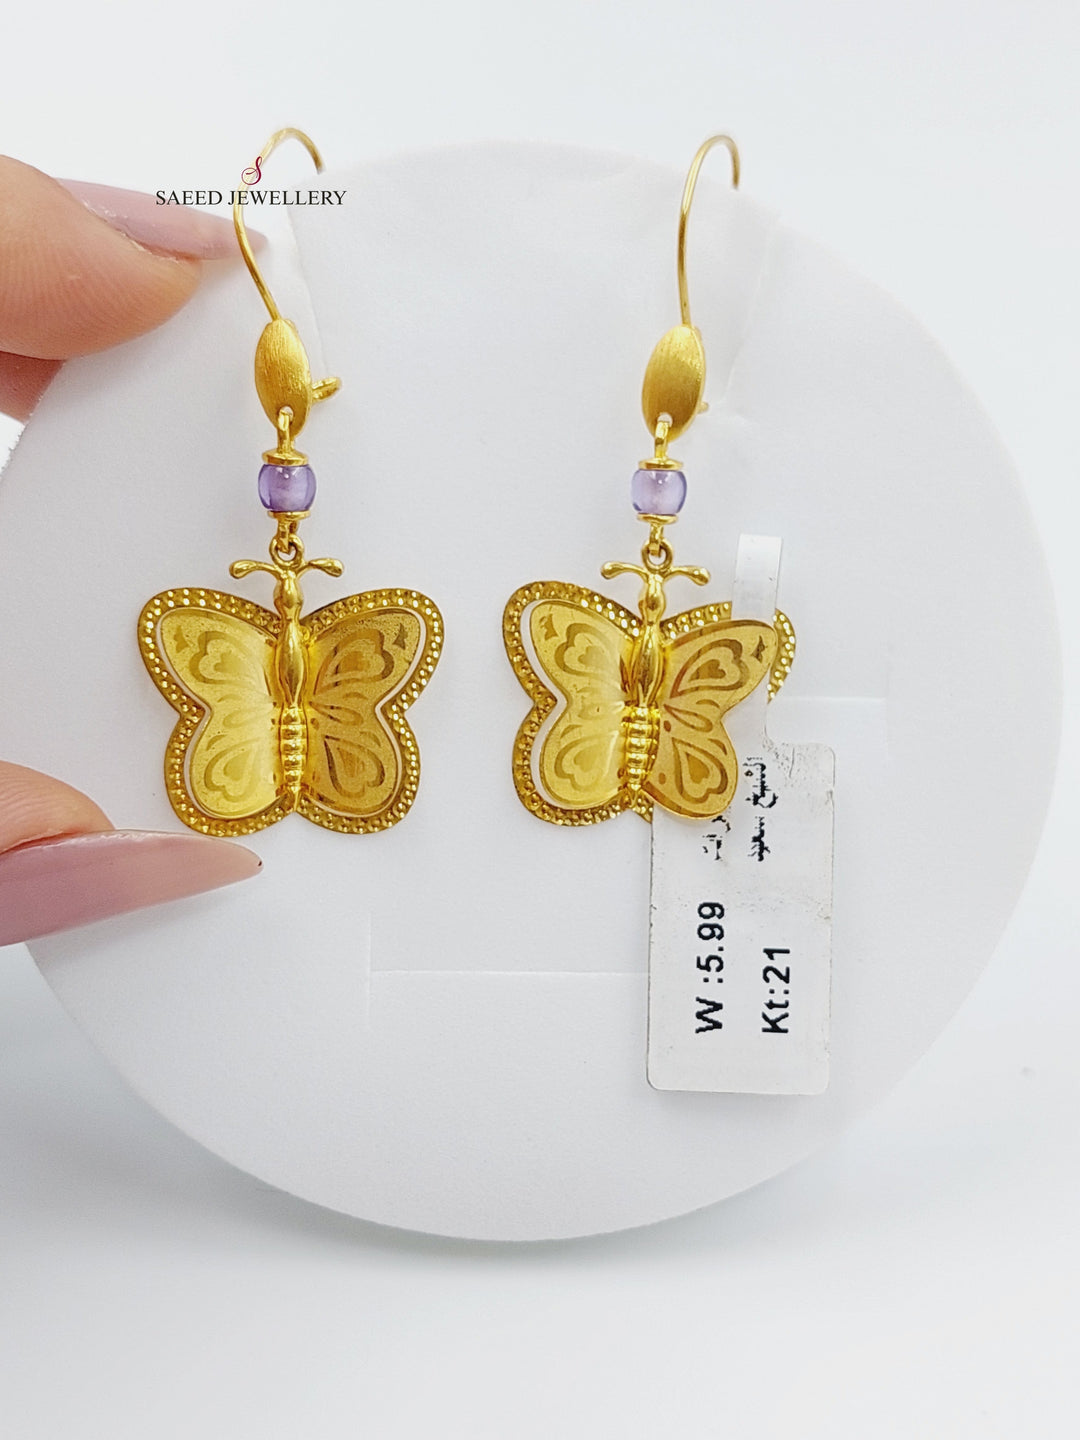 21K Butterfly Earrings Made of 21K Yellow Gold by Saeed Jewelry-حلق-فراشة